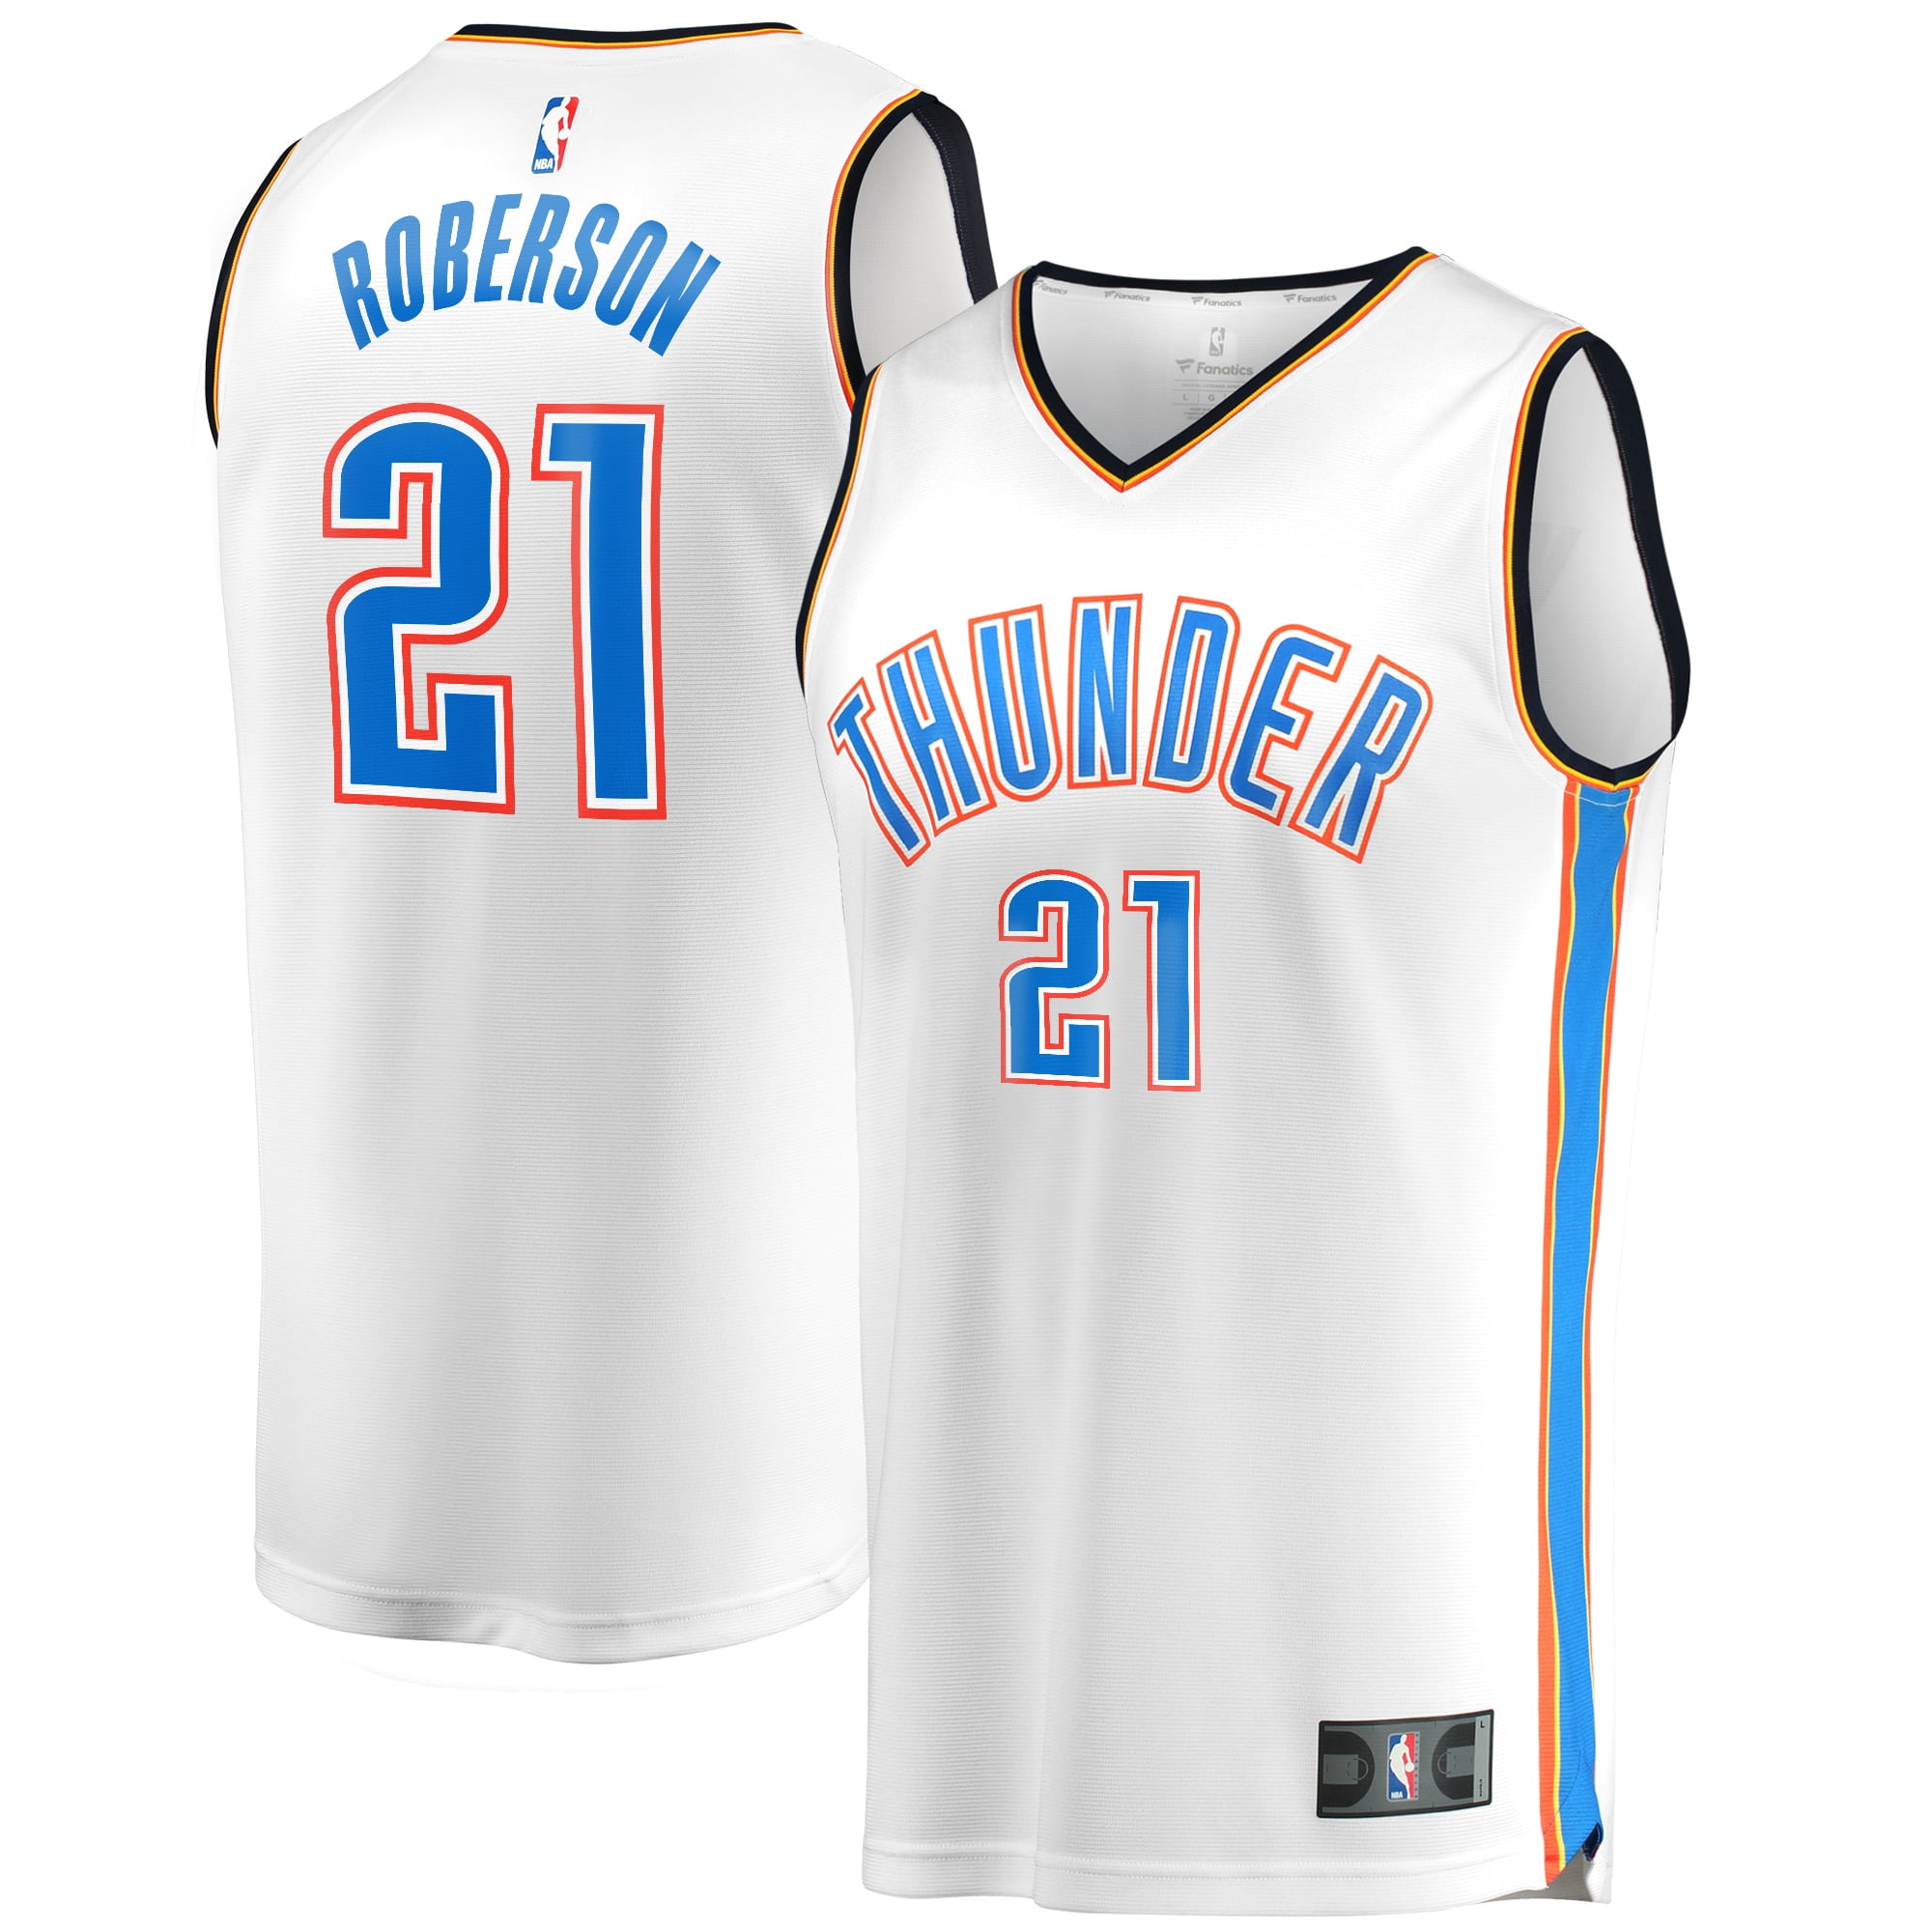 andre roberson jersey